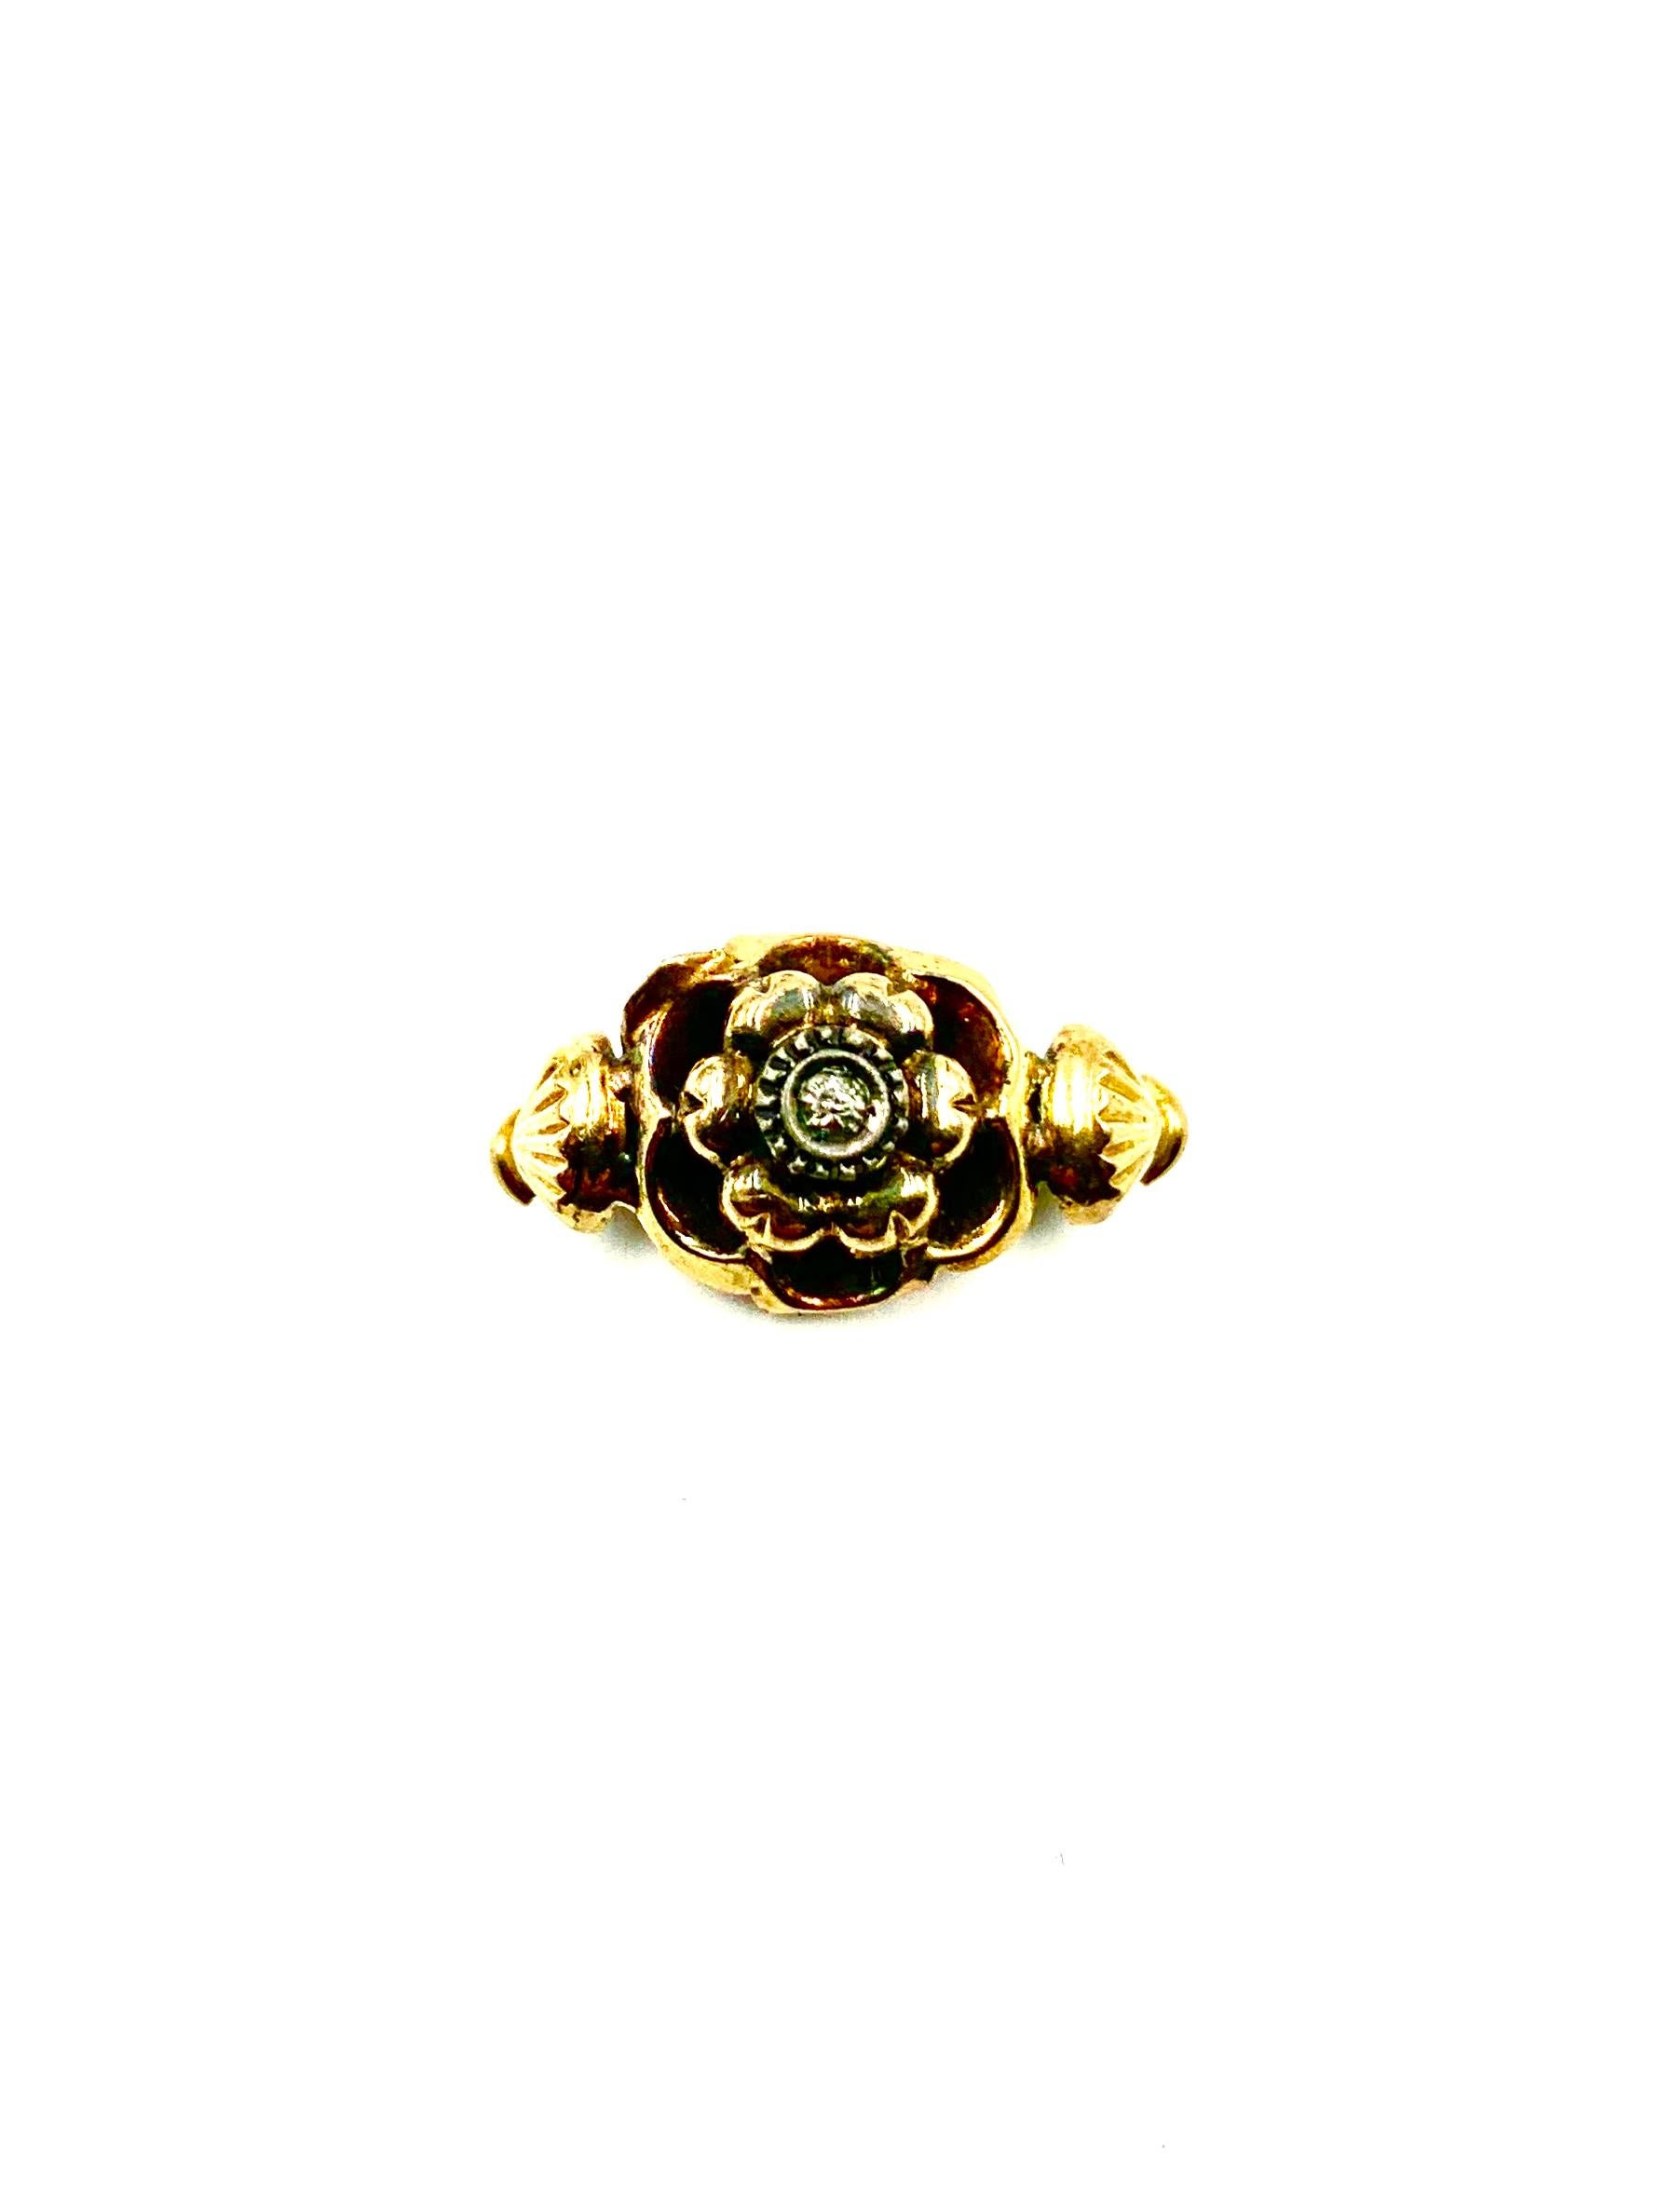 Antique Georgian Rose Ring, 14K Rose Gold, Diamond, Sea Scallop Design Detail In Good Condition For Sale In New York, NY